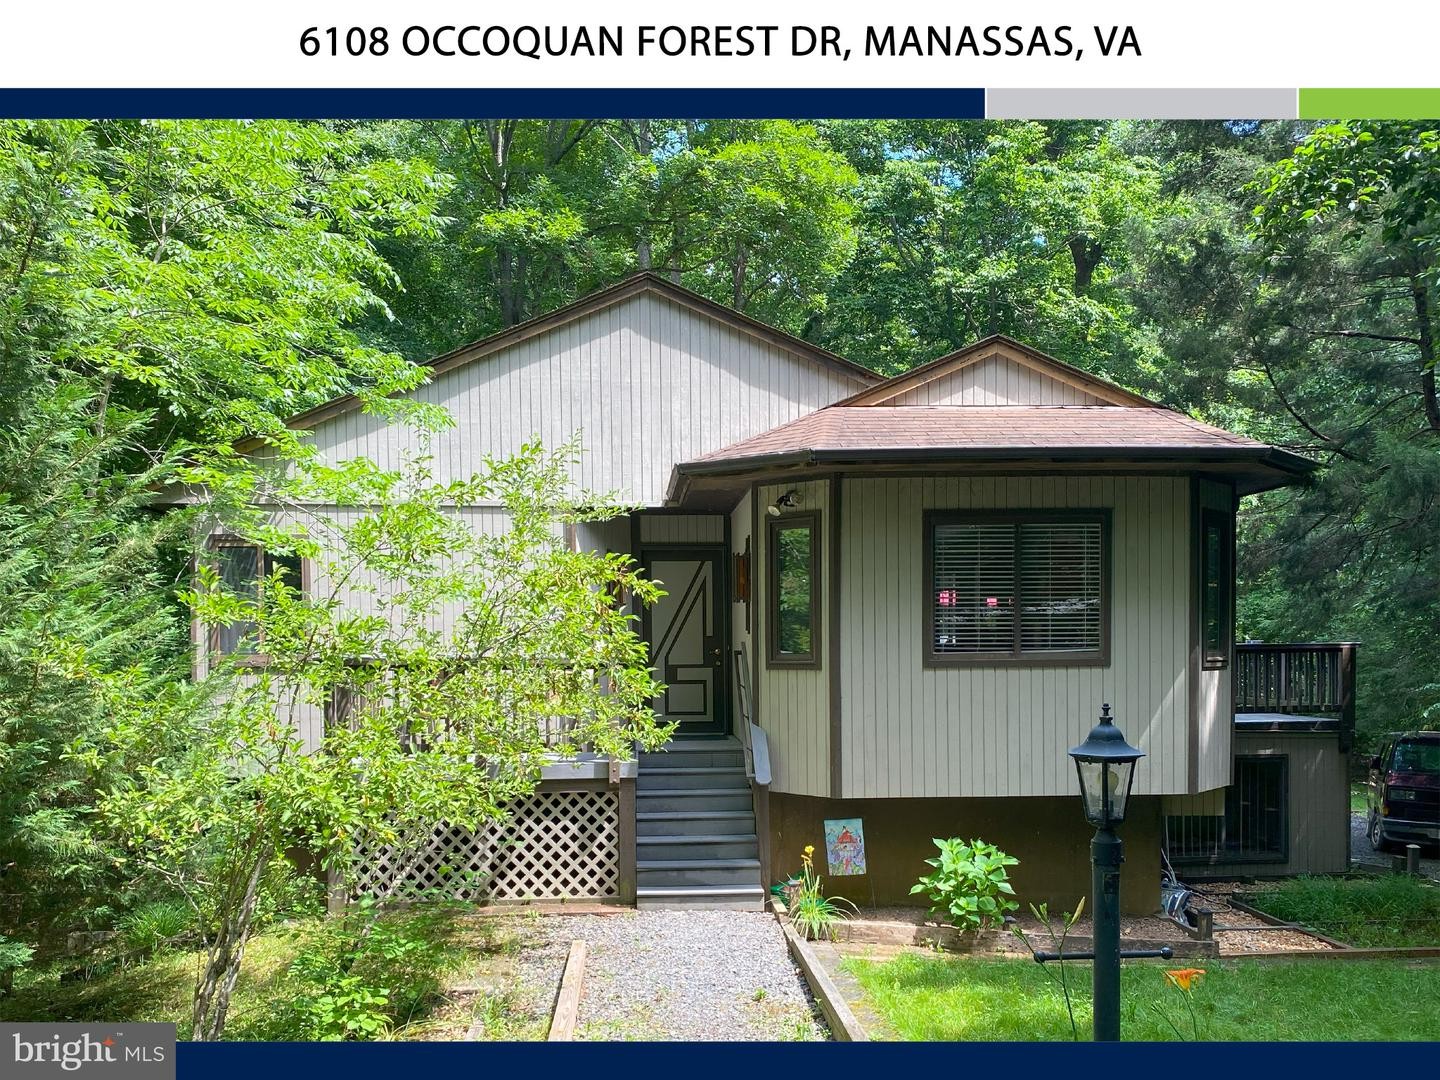 2. 6108 Occoquan Forest Dr